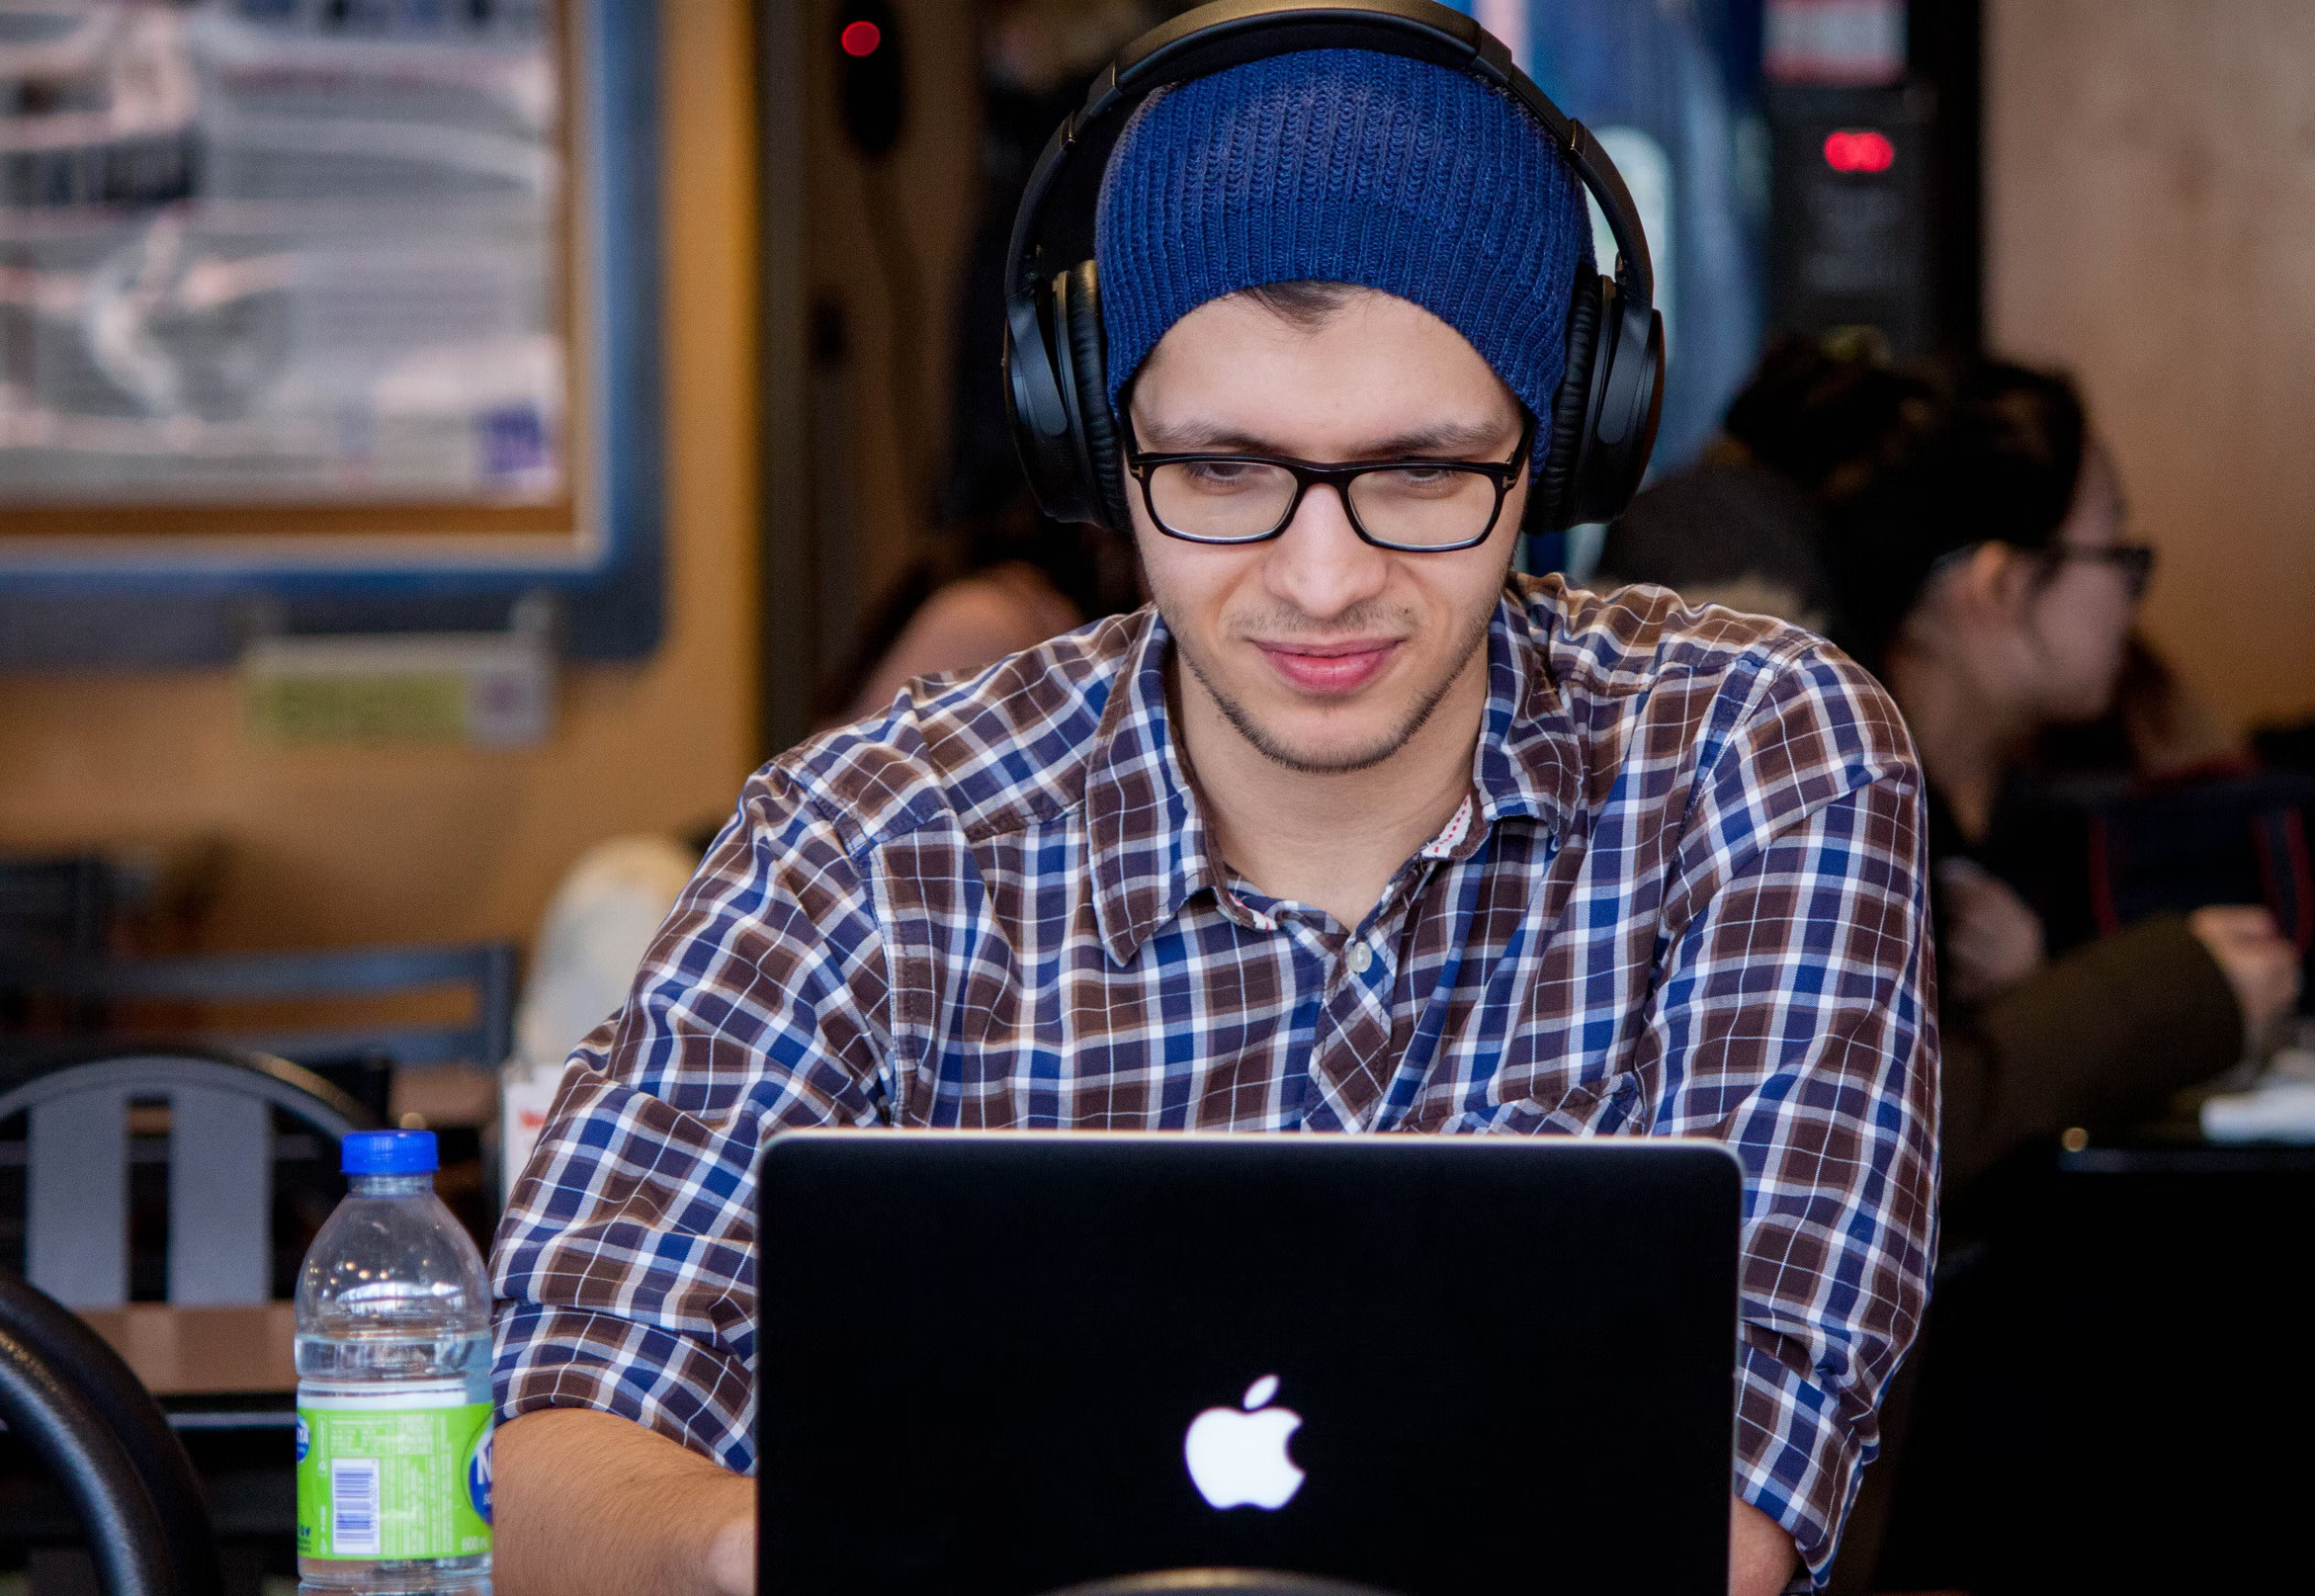 A male IELTS test taker in a cafeteria wearing glasses and headphones and looking into a laptop.